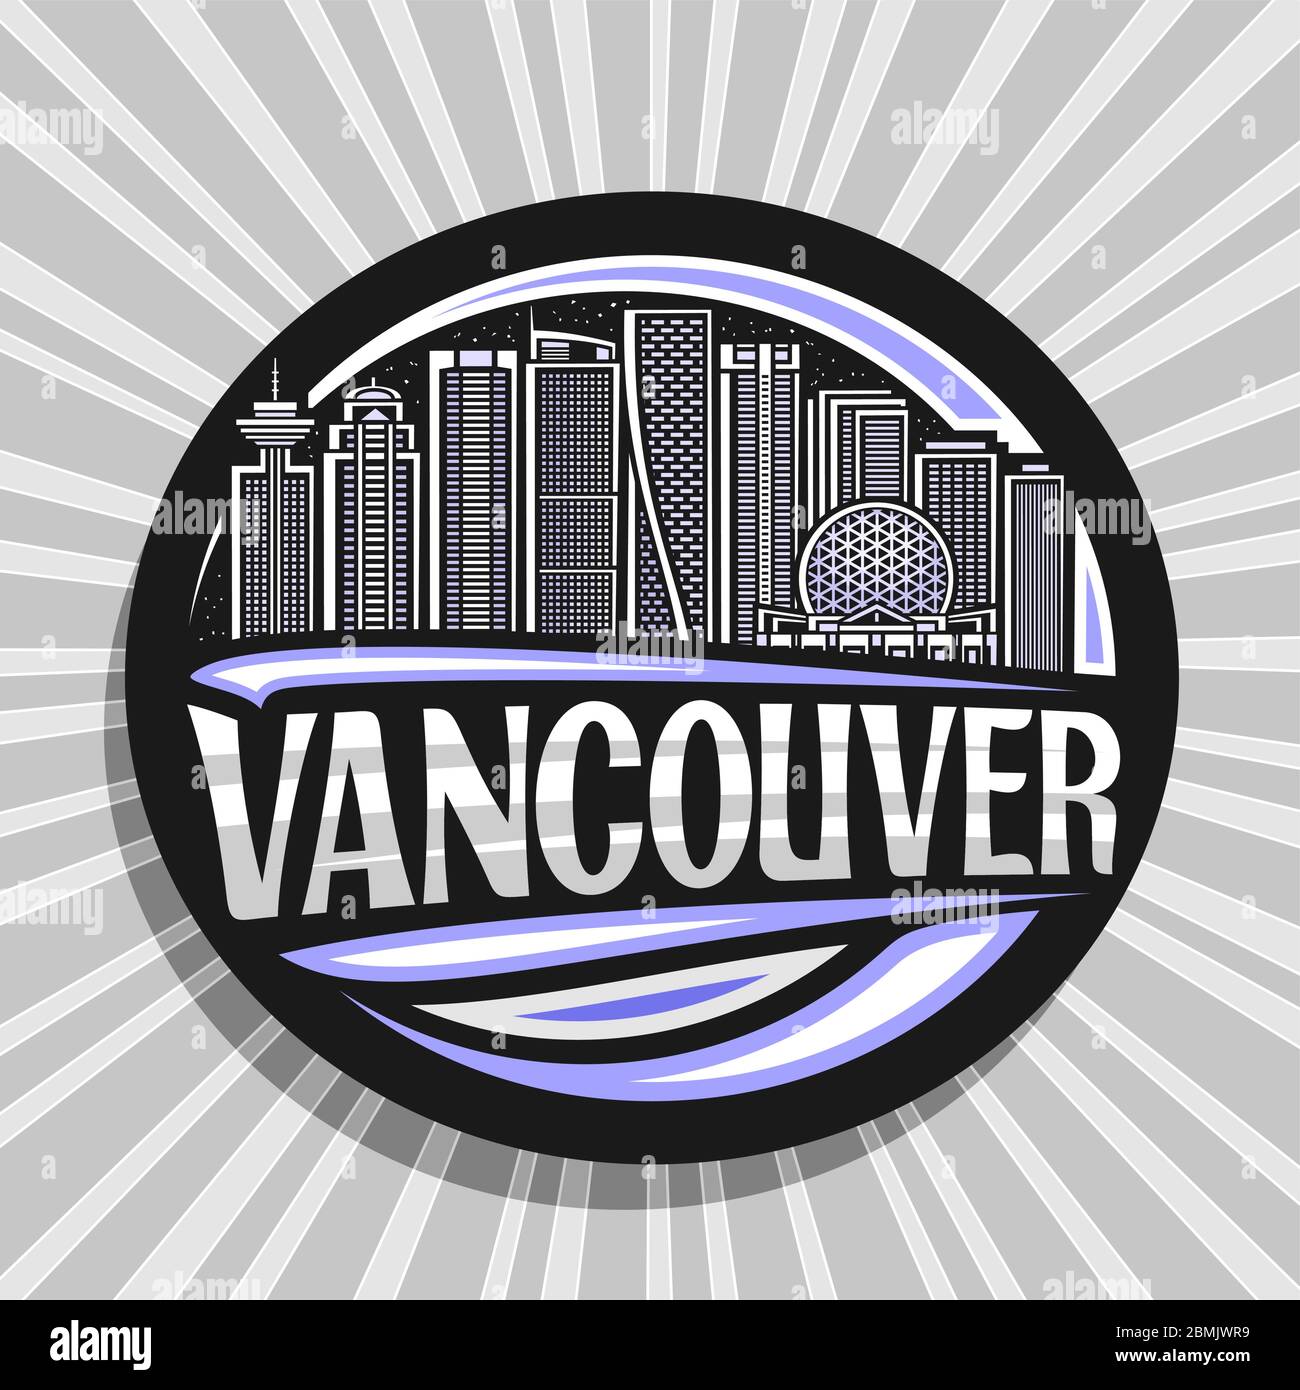 Vector Logo For Vancouver Black Circle Sticker With Line Illustration Of Famous Vancouver City Scape On Twilight Sky Background Design Tourist Fridg Stock Vector Image Art Alamy